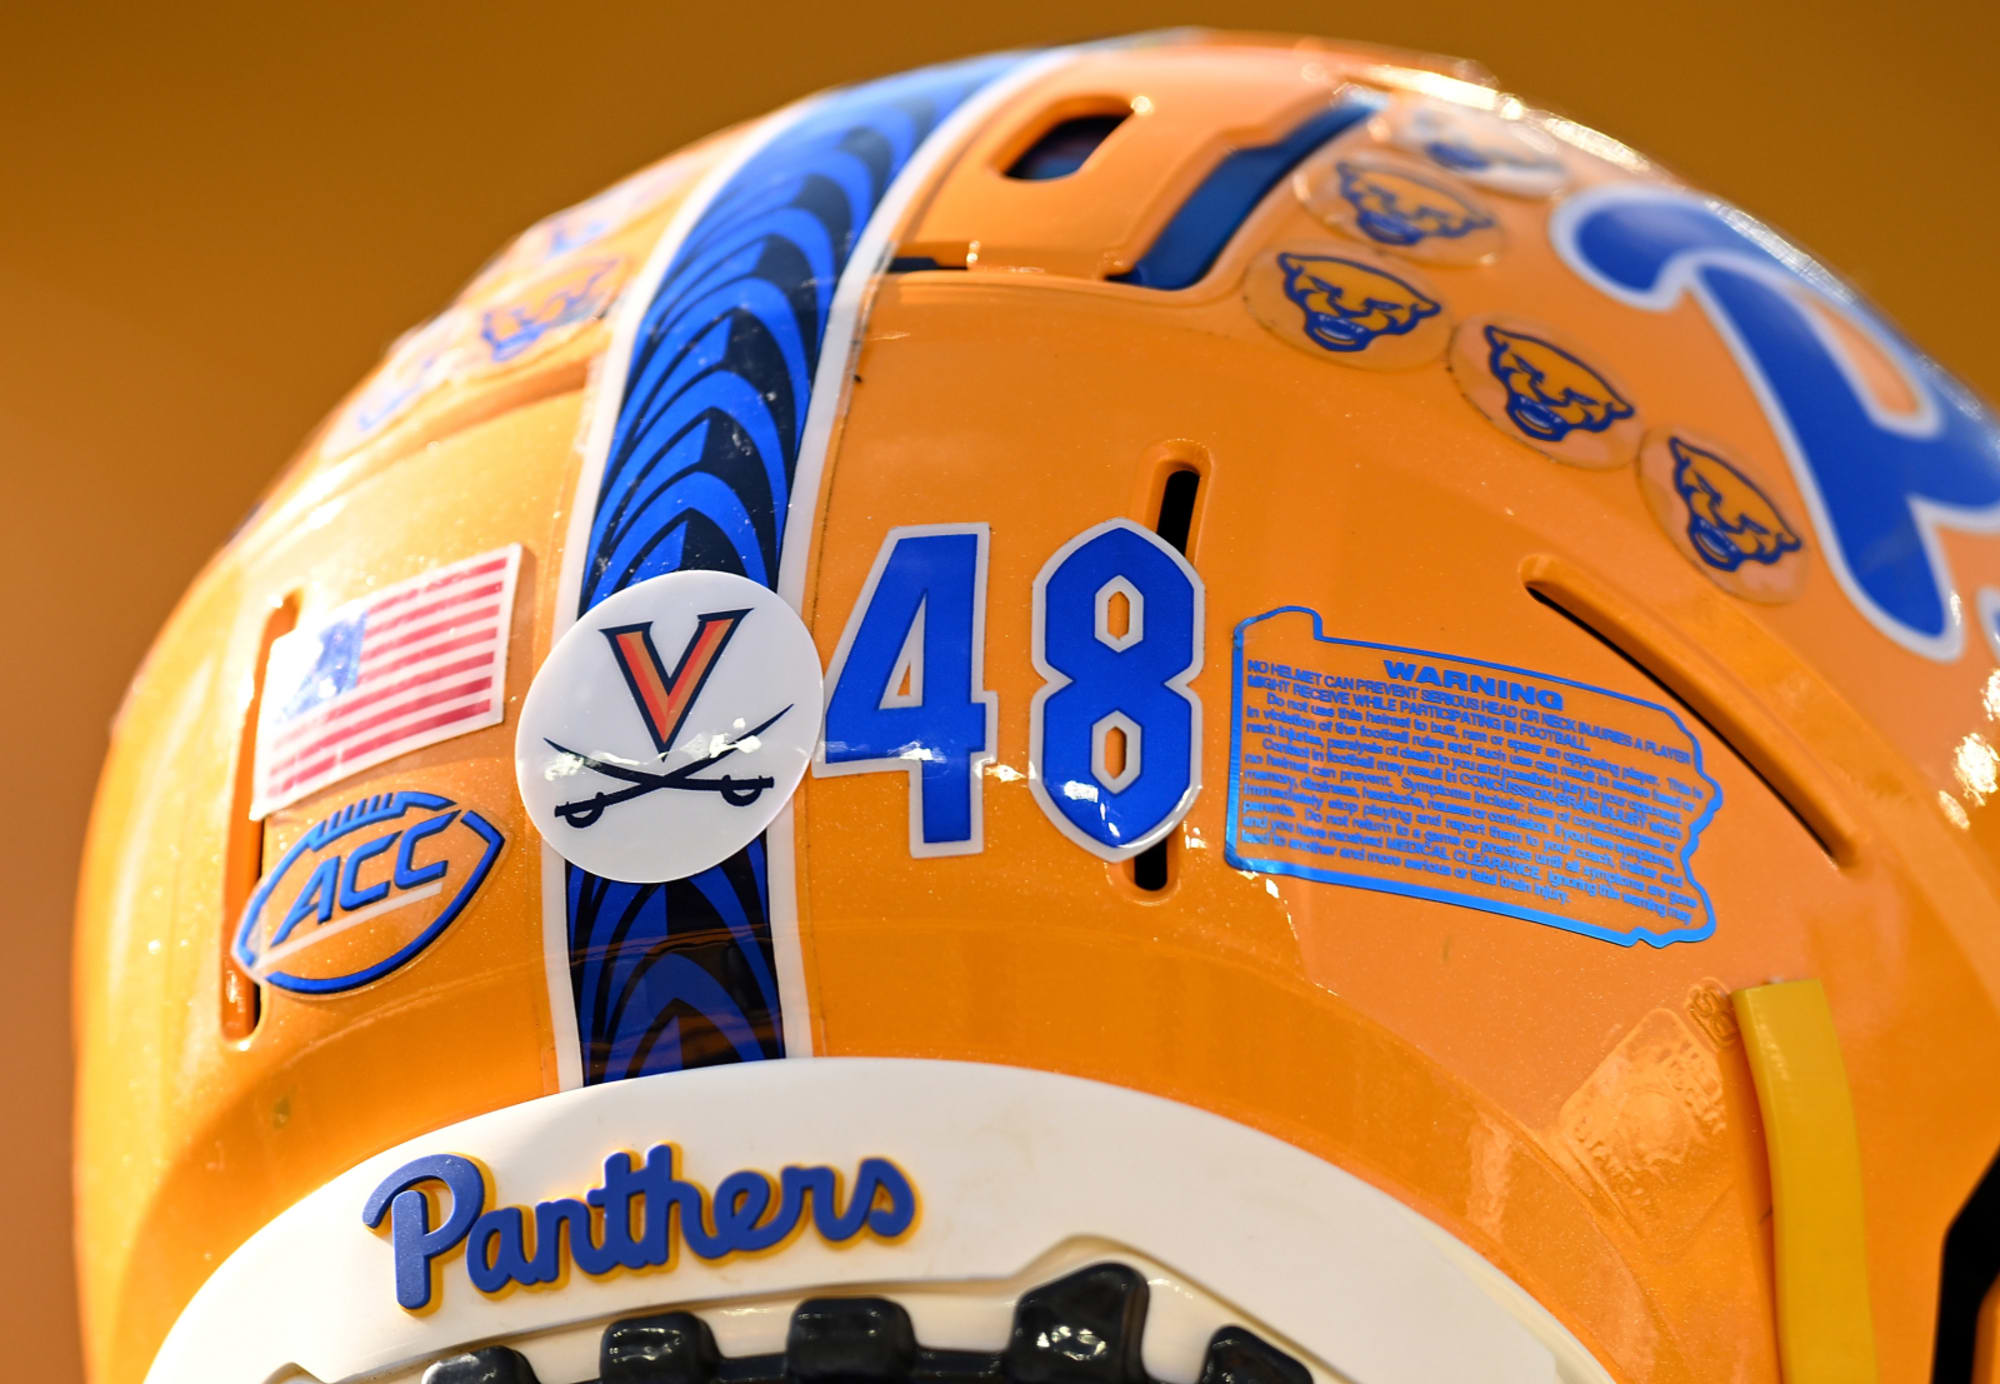 Virginia Tech, LSU, Florida and college football world pay tribute to UVA